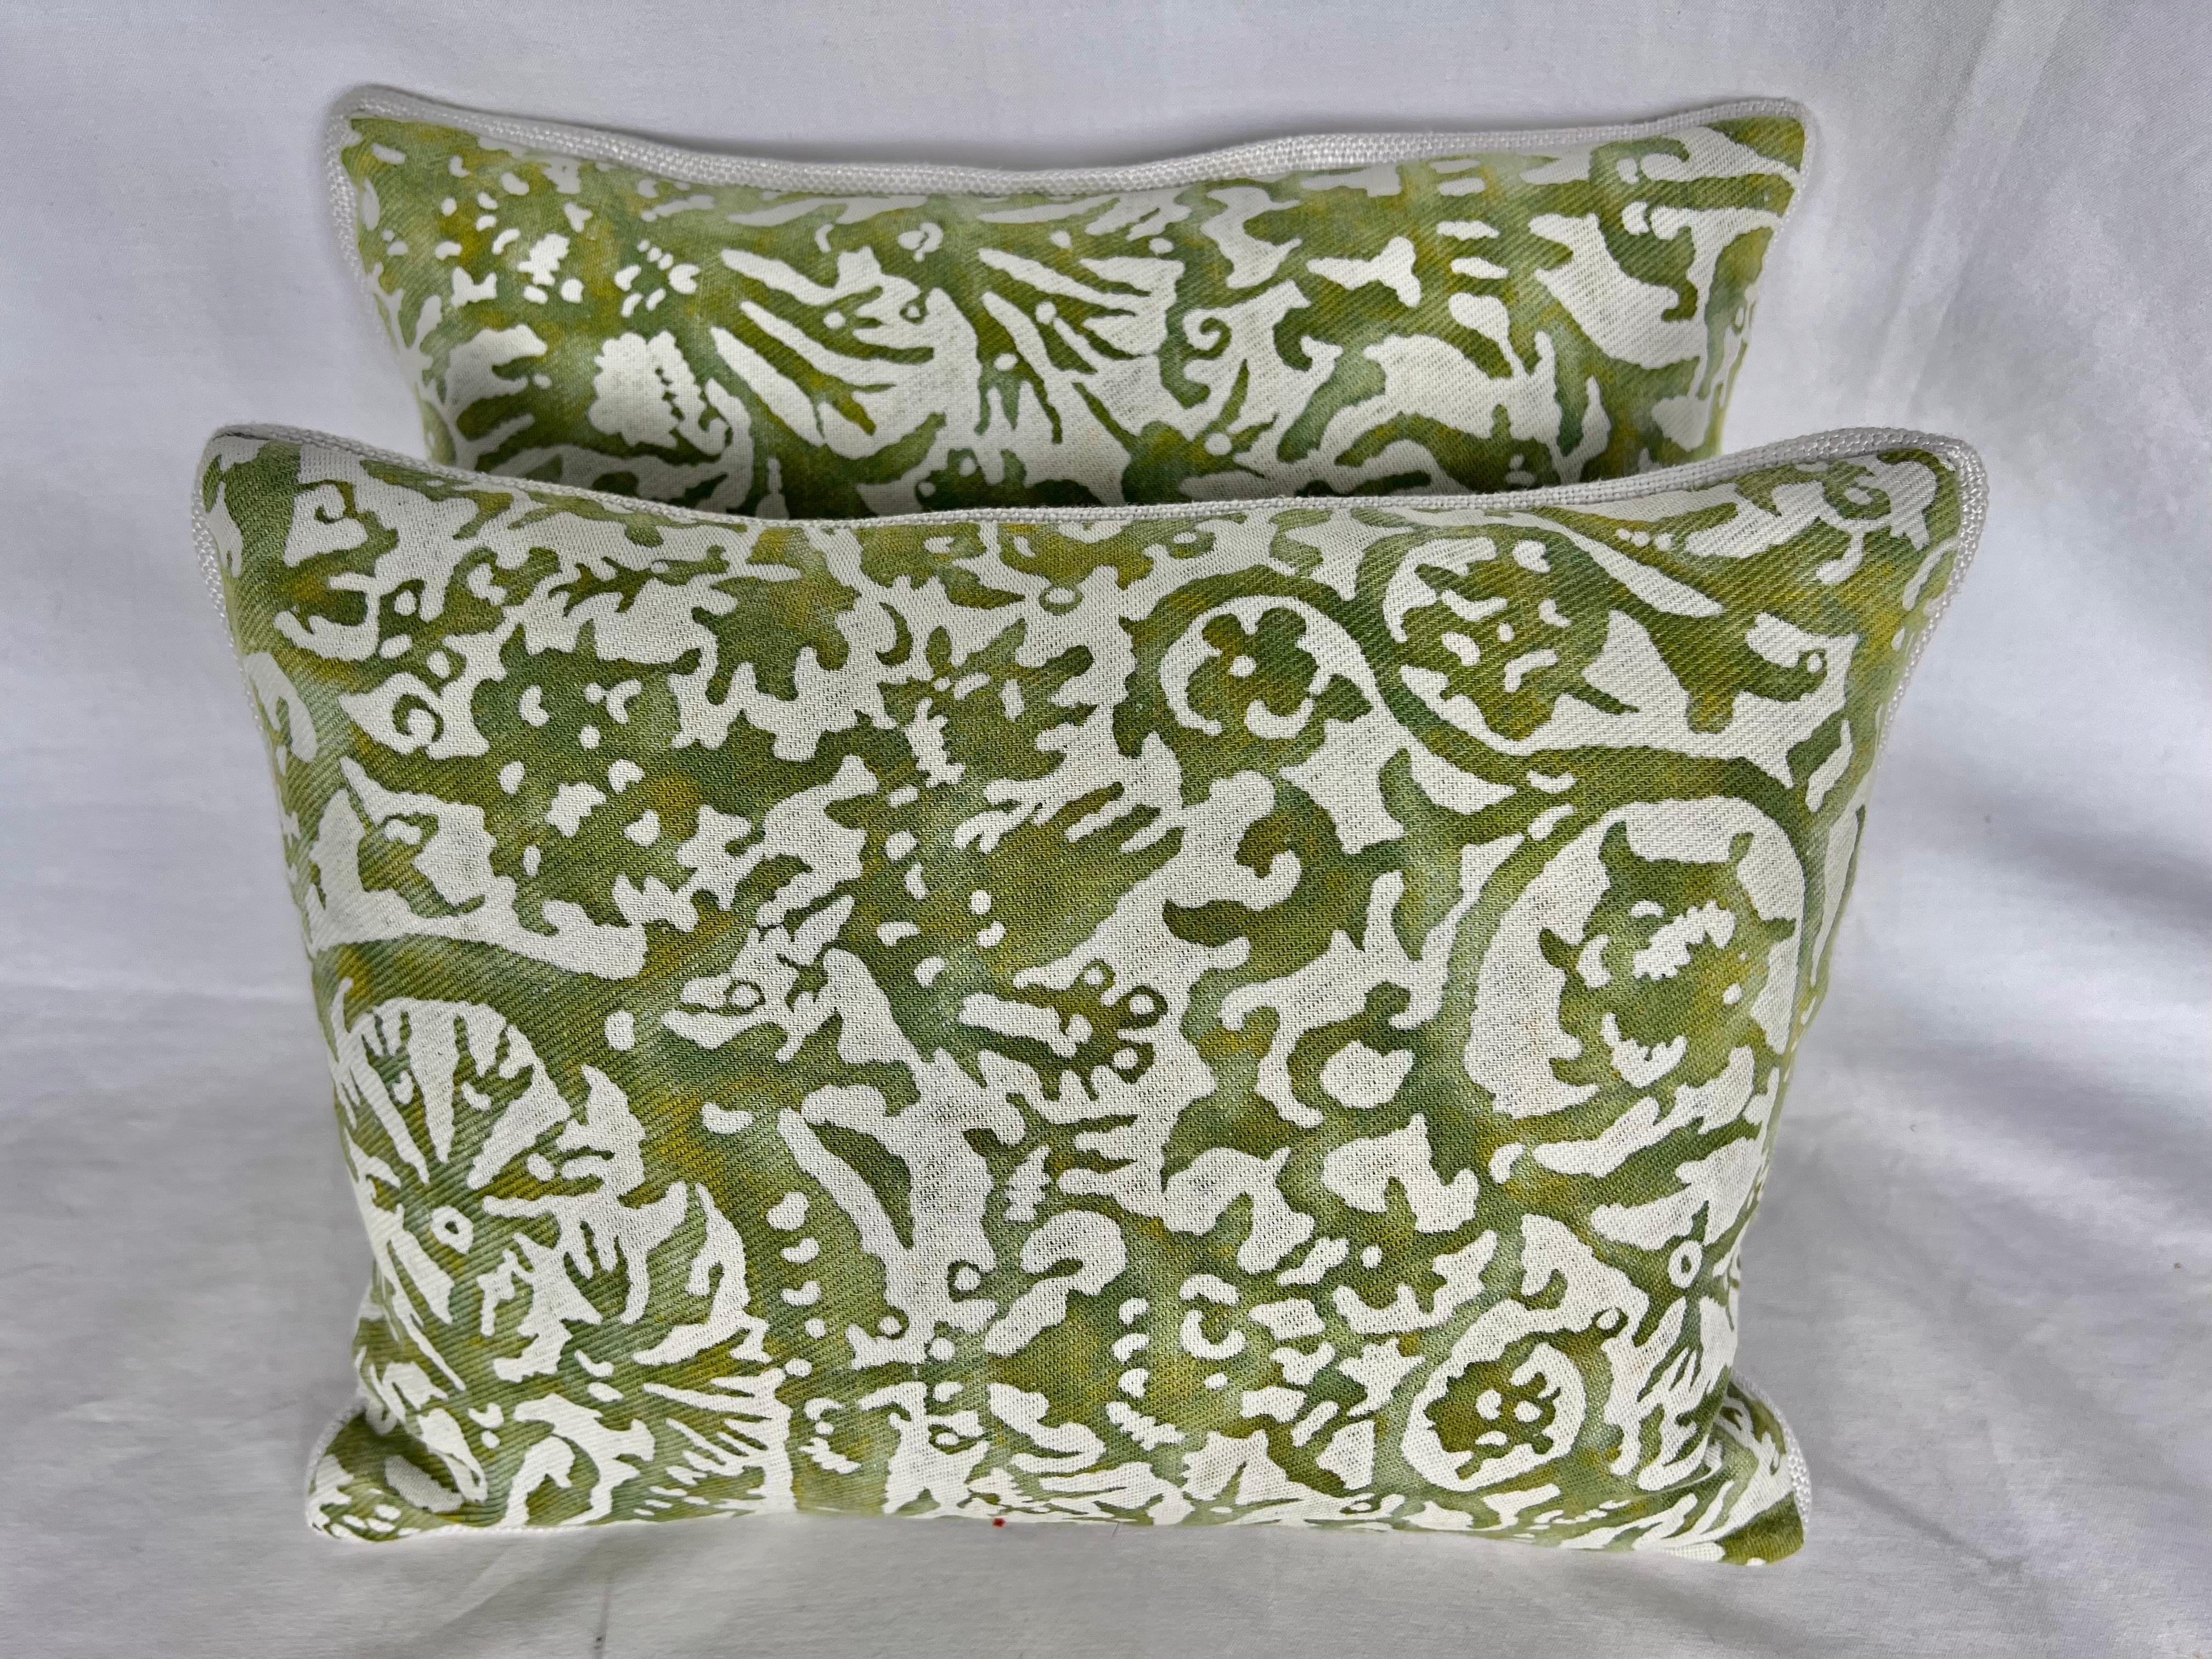 Pair of custom pillows made with vintage green & white Fortuny on the fronts and a crisp white linen on the backs. Down inserts, zipper closures.